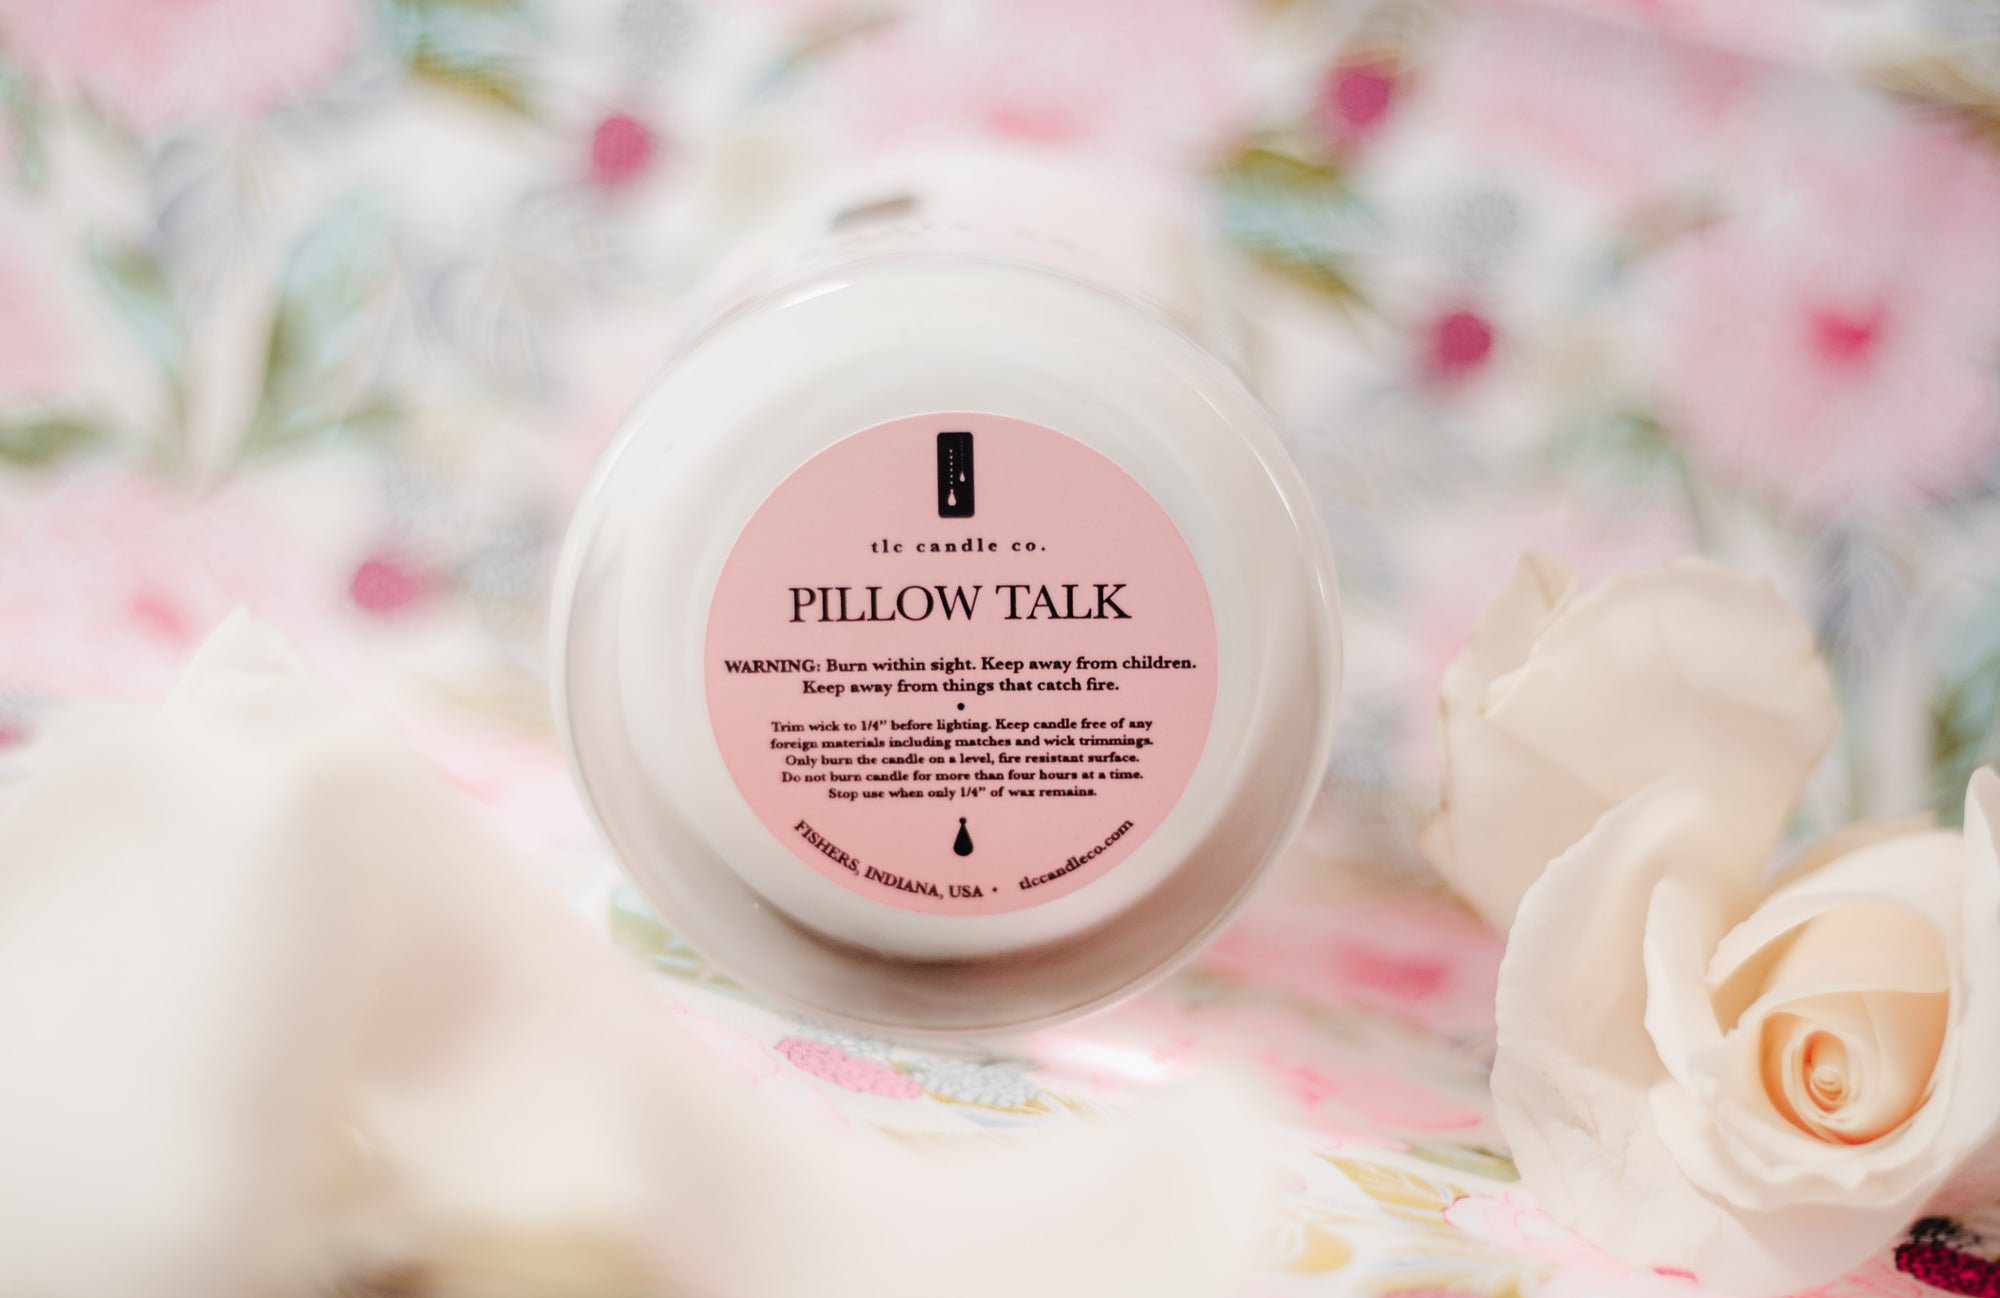 The Scent of Peony is Thought to …?